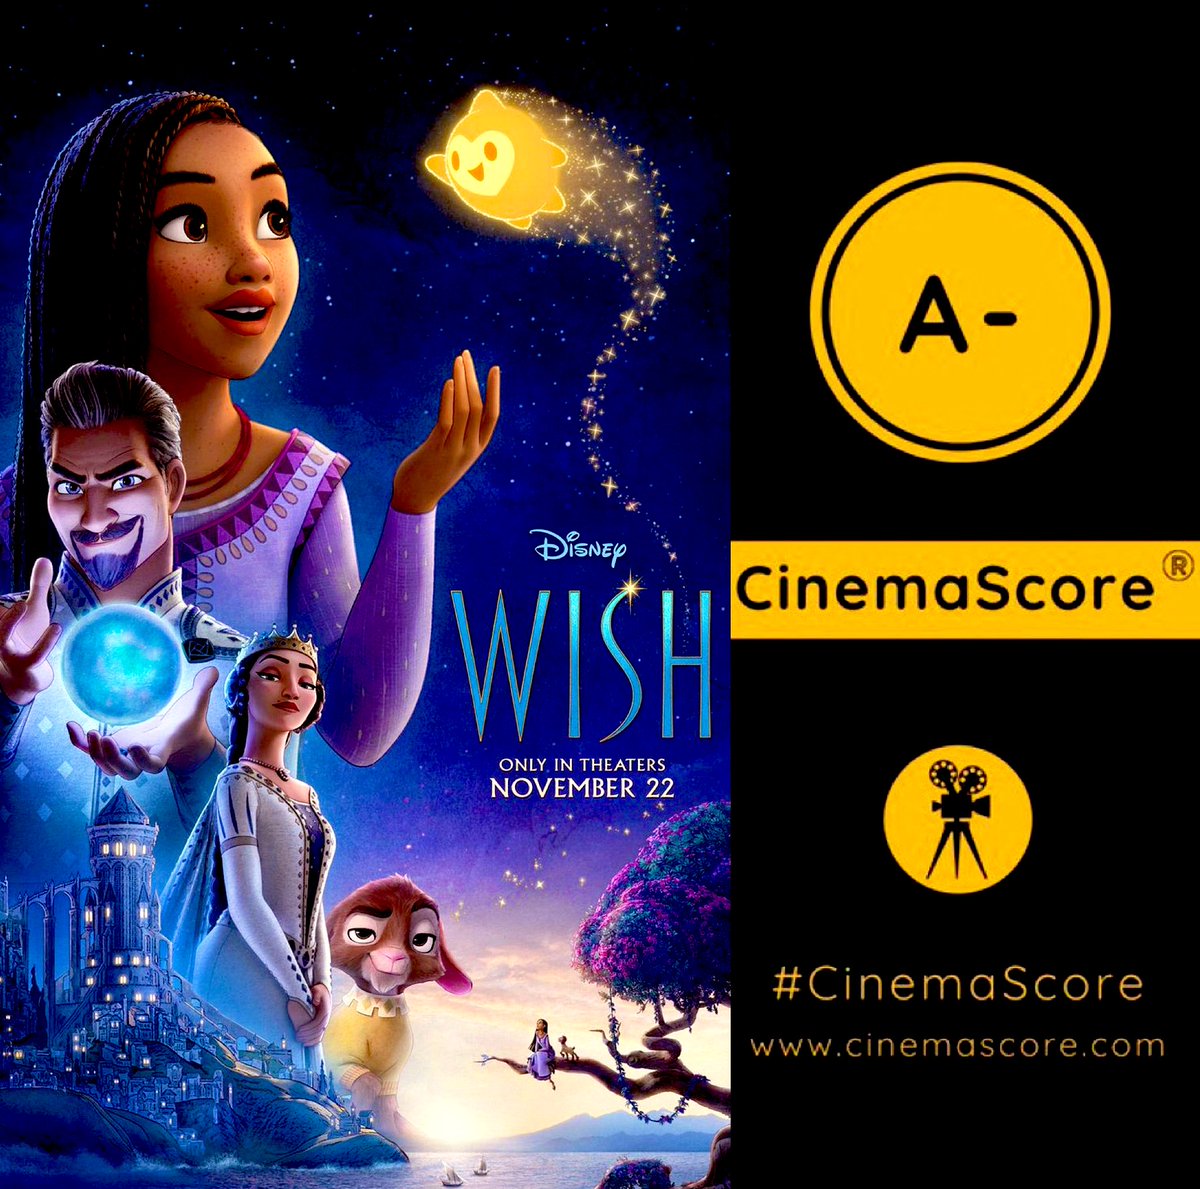 Audiences have spoken!!! #1
#Disney’s new animation #Wish is being more appreciated by moviegoers than by critics, receiving an A- #CinemaScore from audiences, average for PG animations, on par with #Lightyear, #DCLeagueOfSuperPets, #RalphBreaksTheInternet & #Frozen2

Under